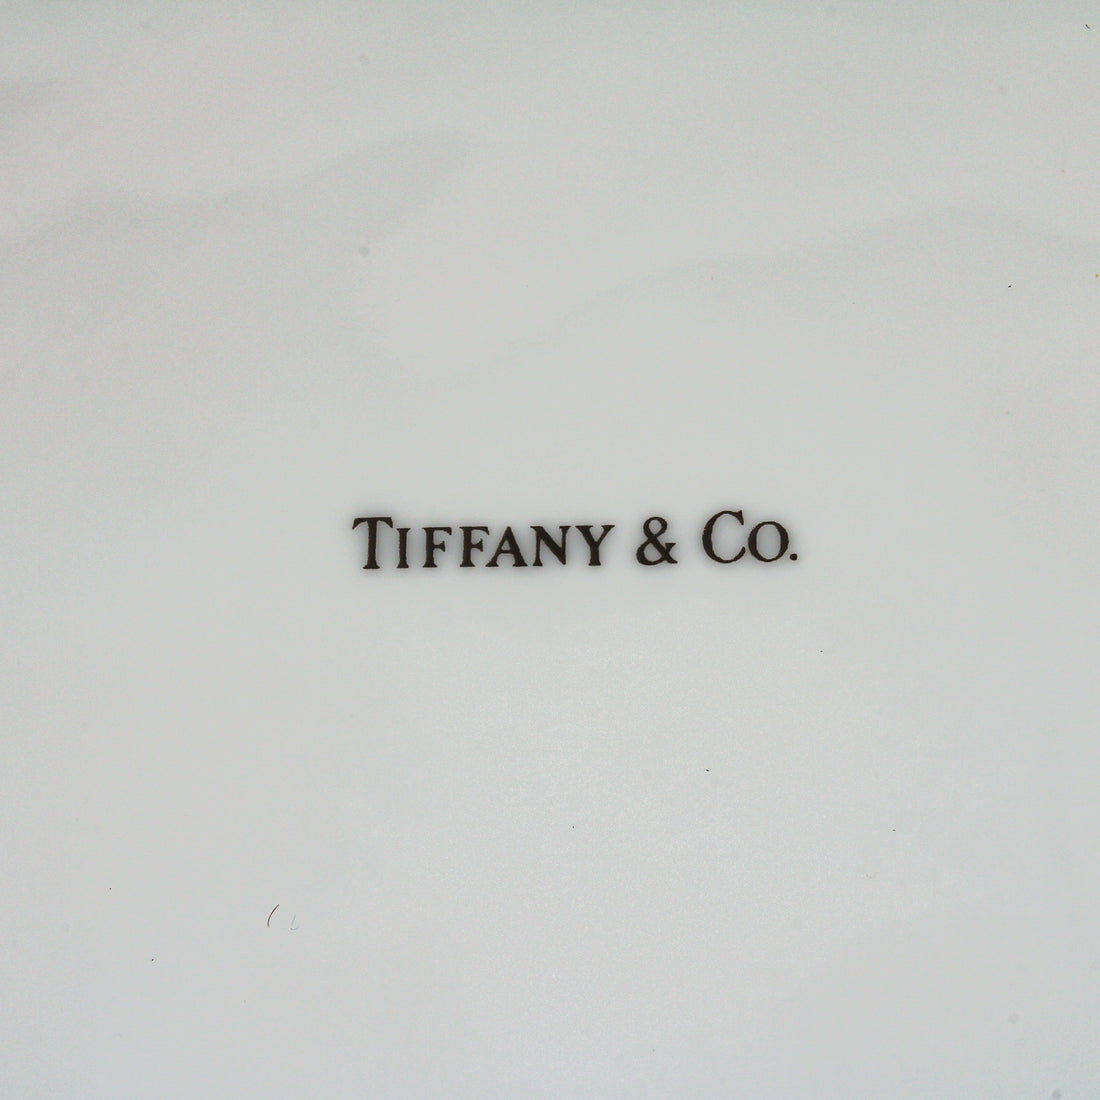 TIFFANY & CO. Playing Card Dessert Plates - Set of 4